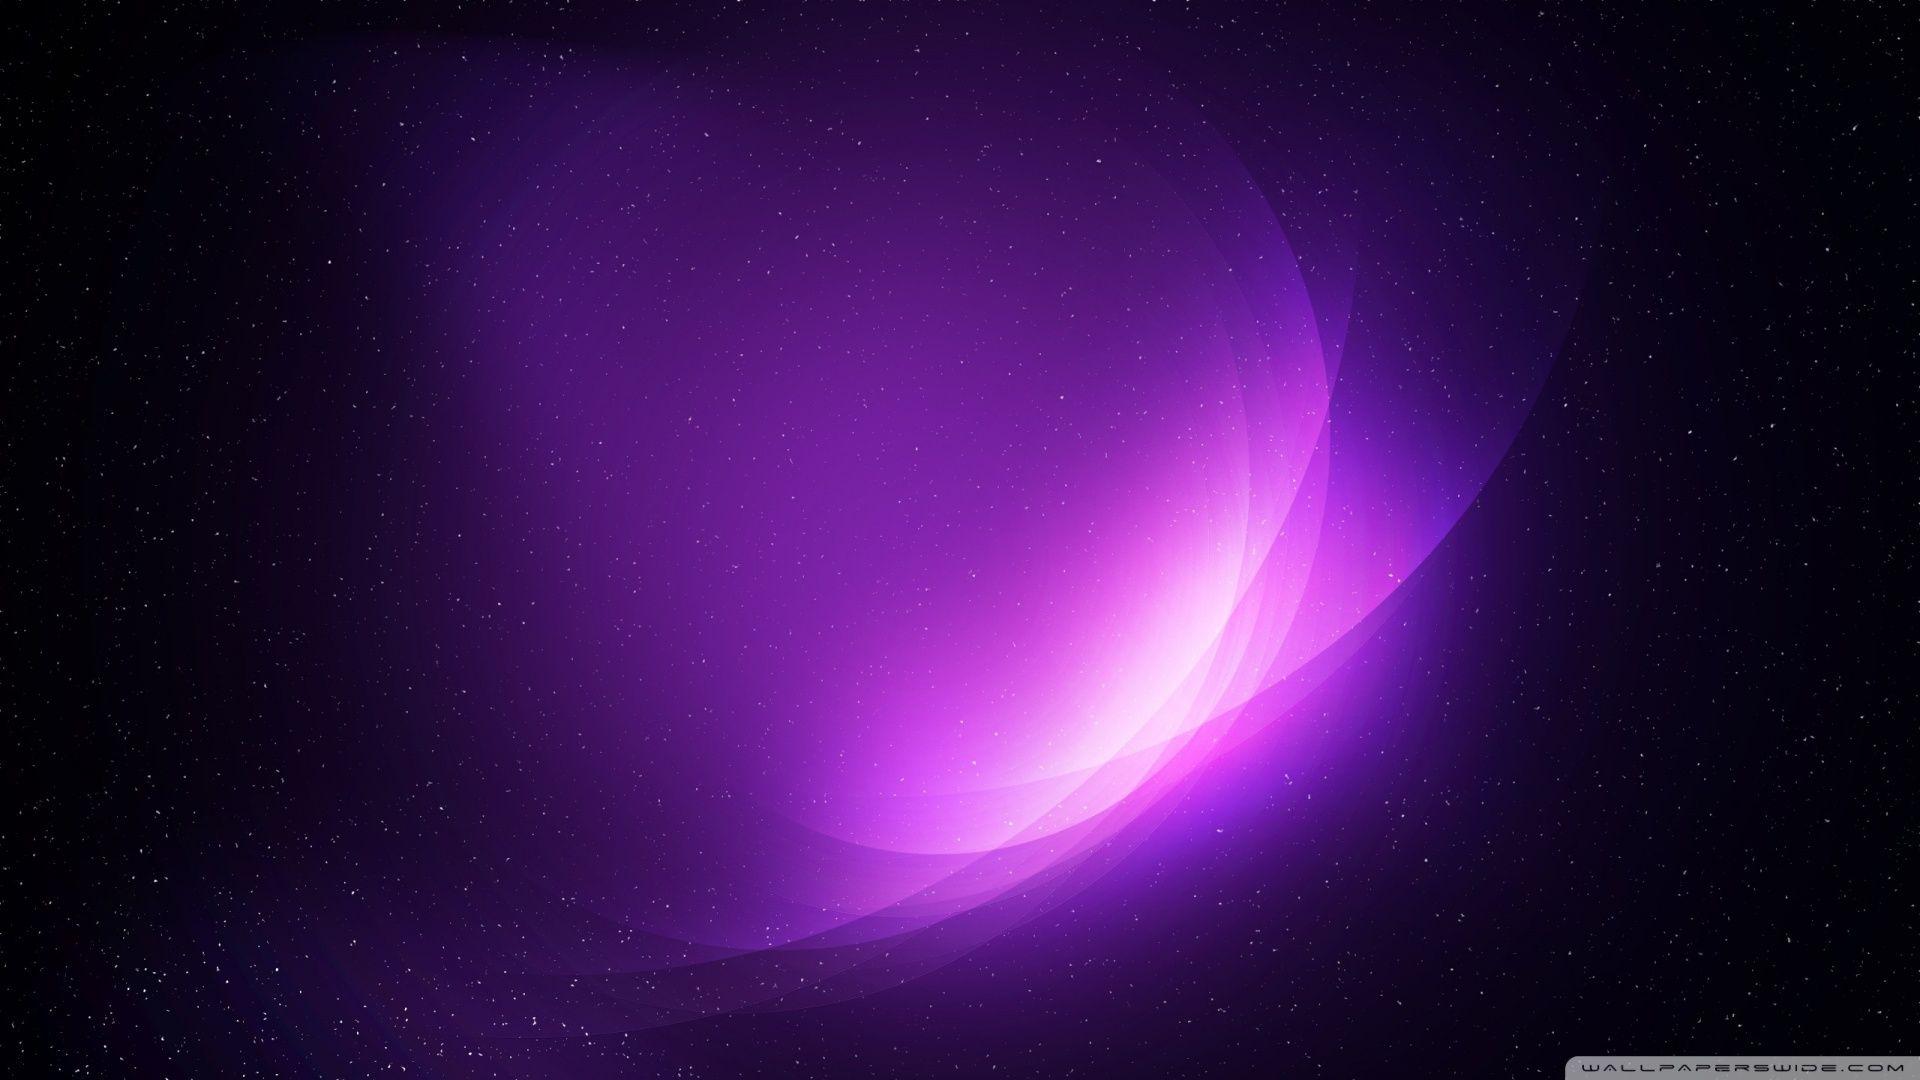 6,000 Free Space Wallpapers [HD & 4K] - Pixabay